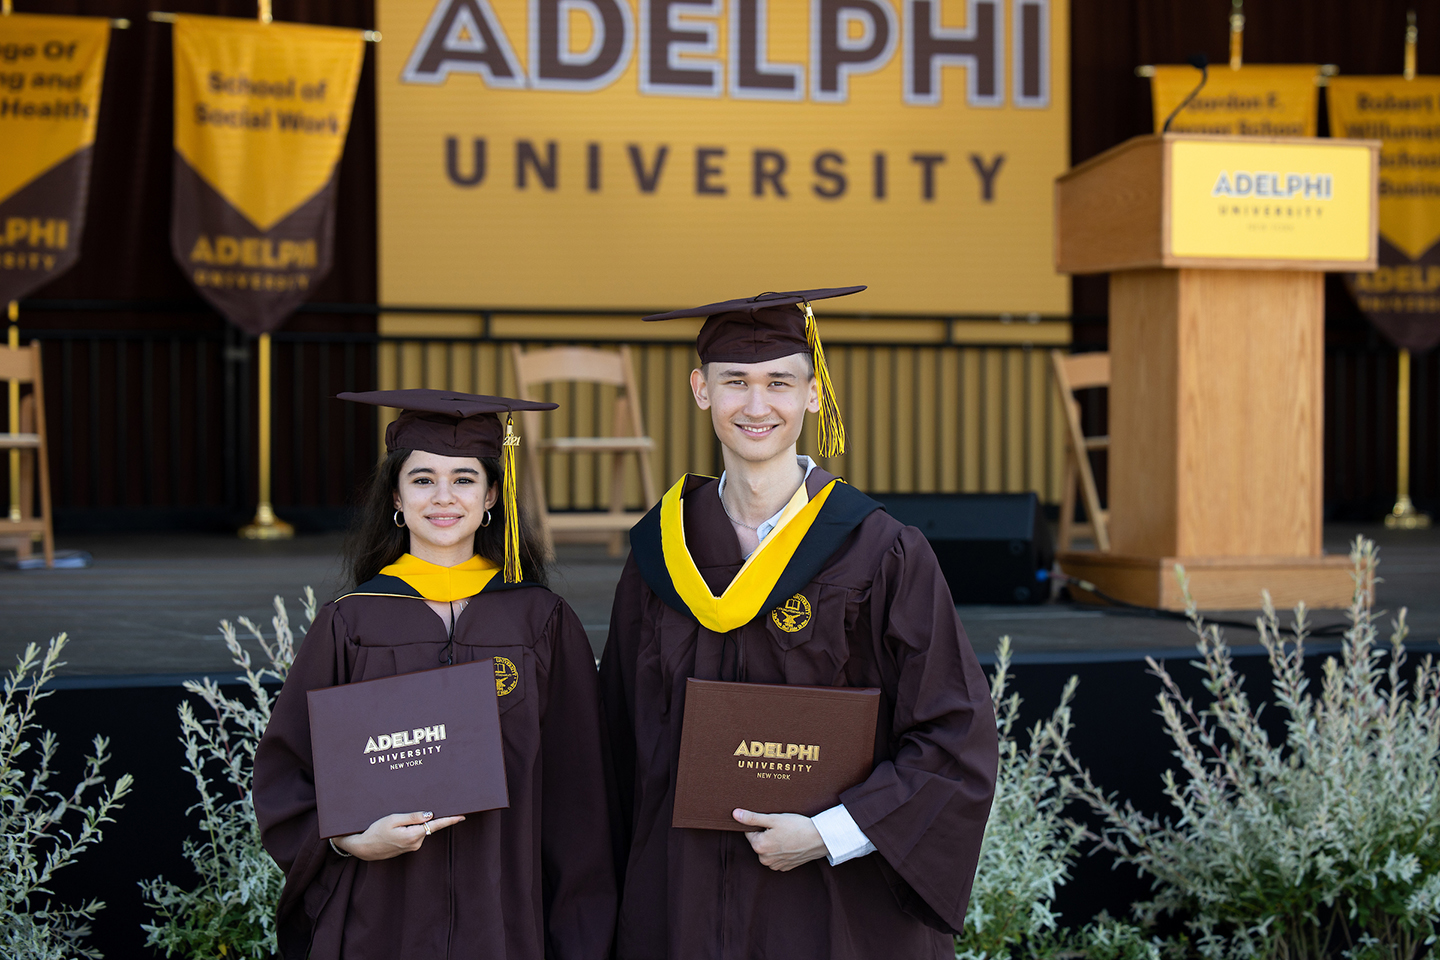 Two Adelphi graduates holding diplomas pose for a picture.